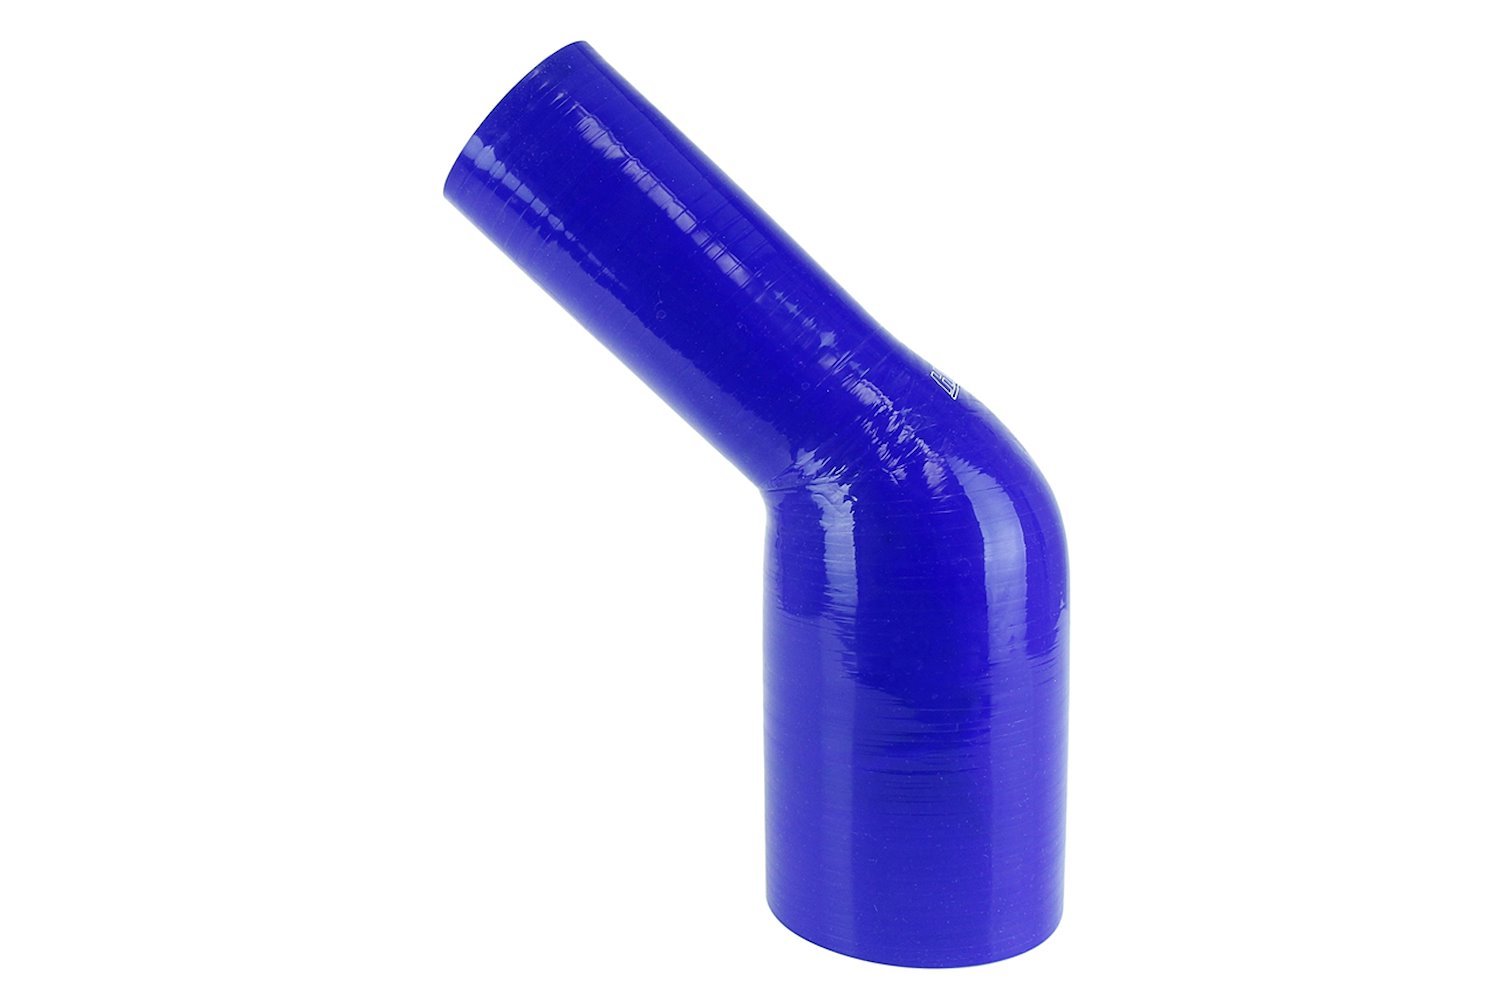 HTSER45-200-238-BLUE Silicone 45-Degree Elbow Hose, High-Temp 4-Ply Reinforced, 2 in. - 2-3/8 in. ID, Blue